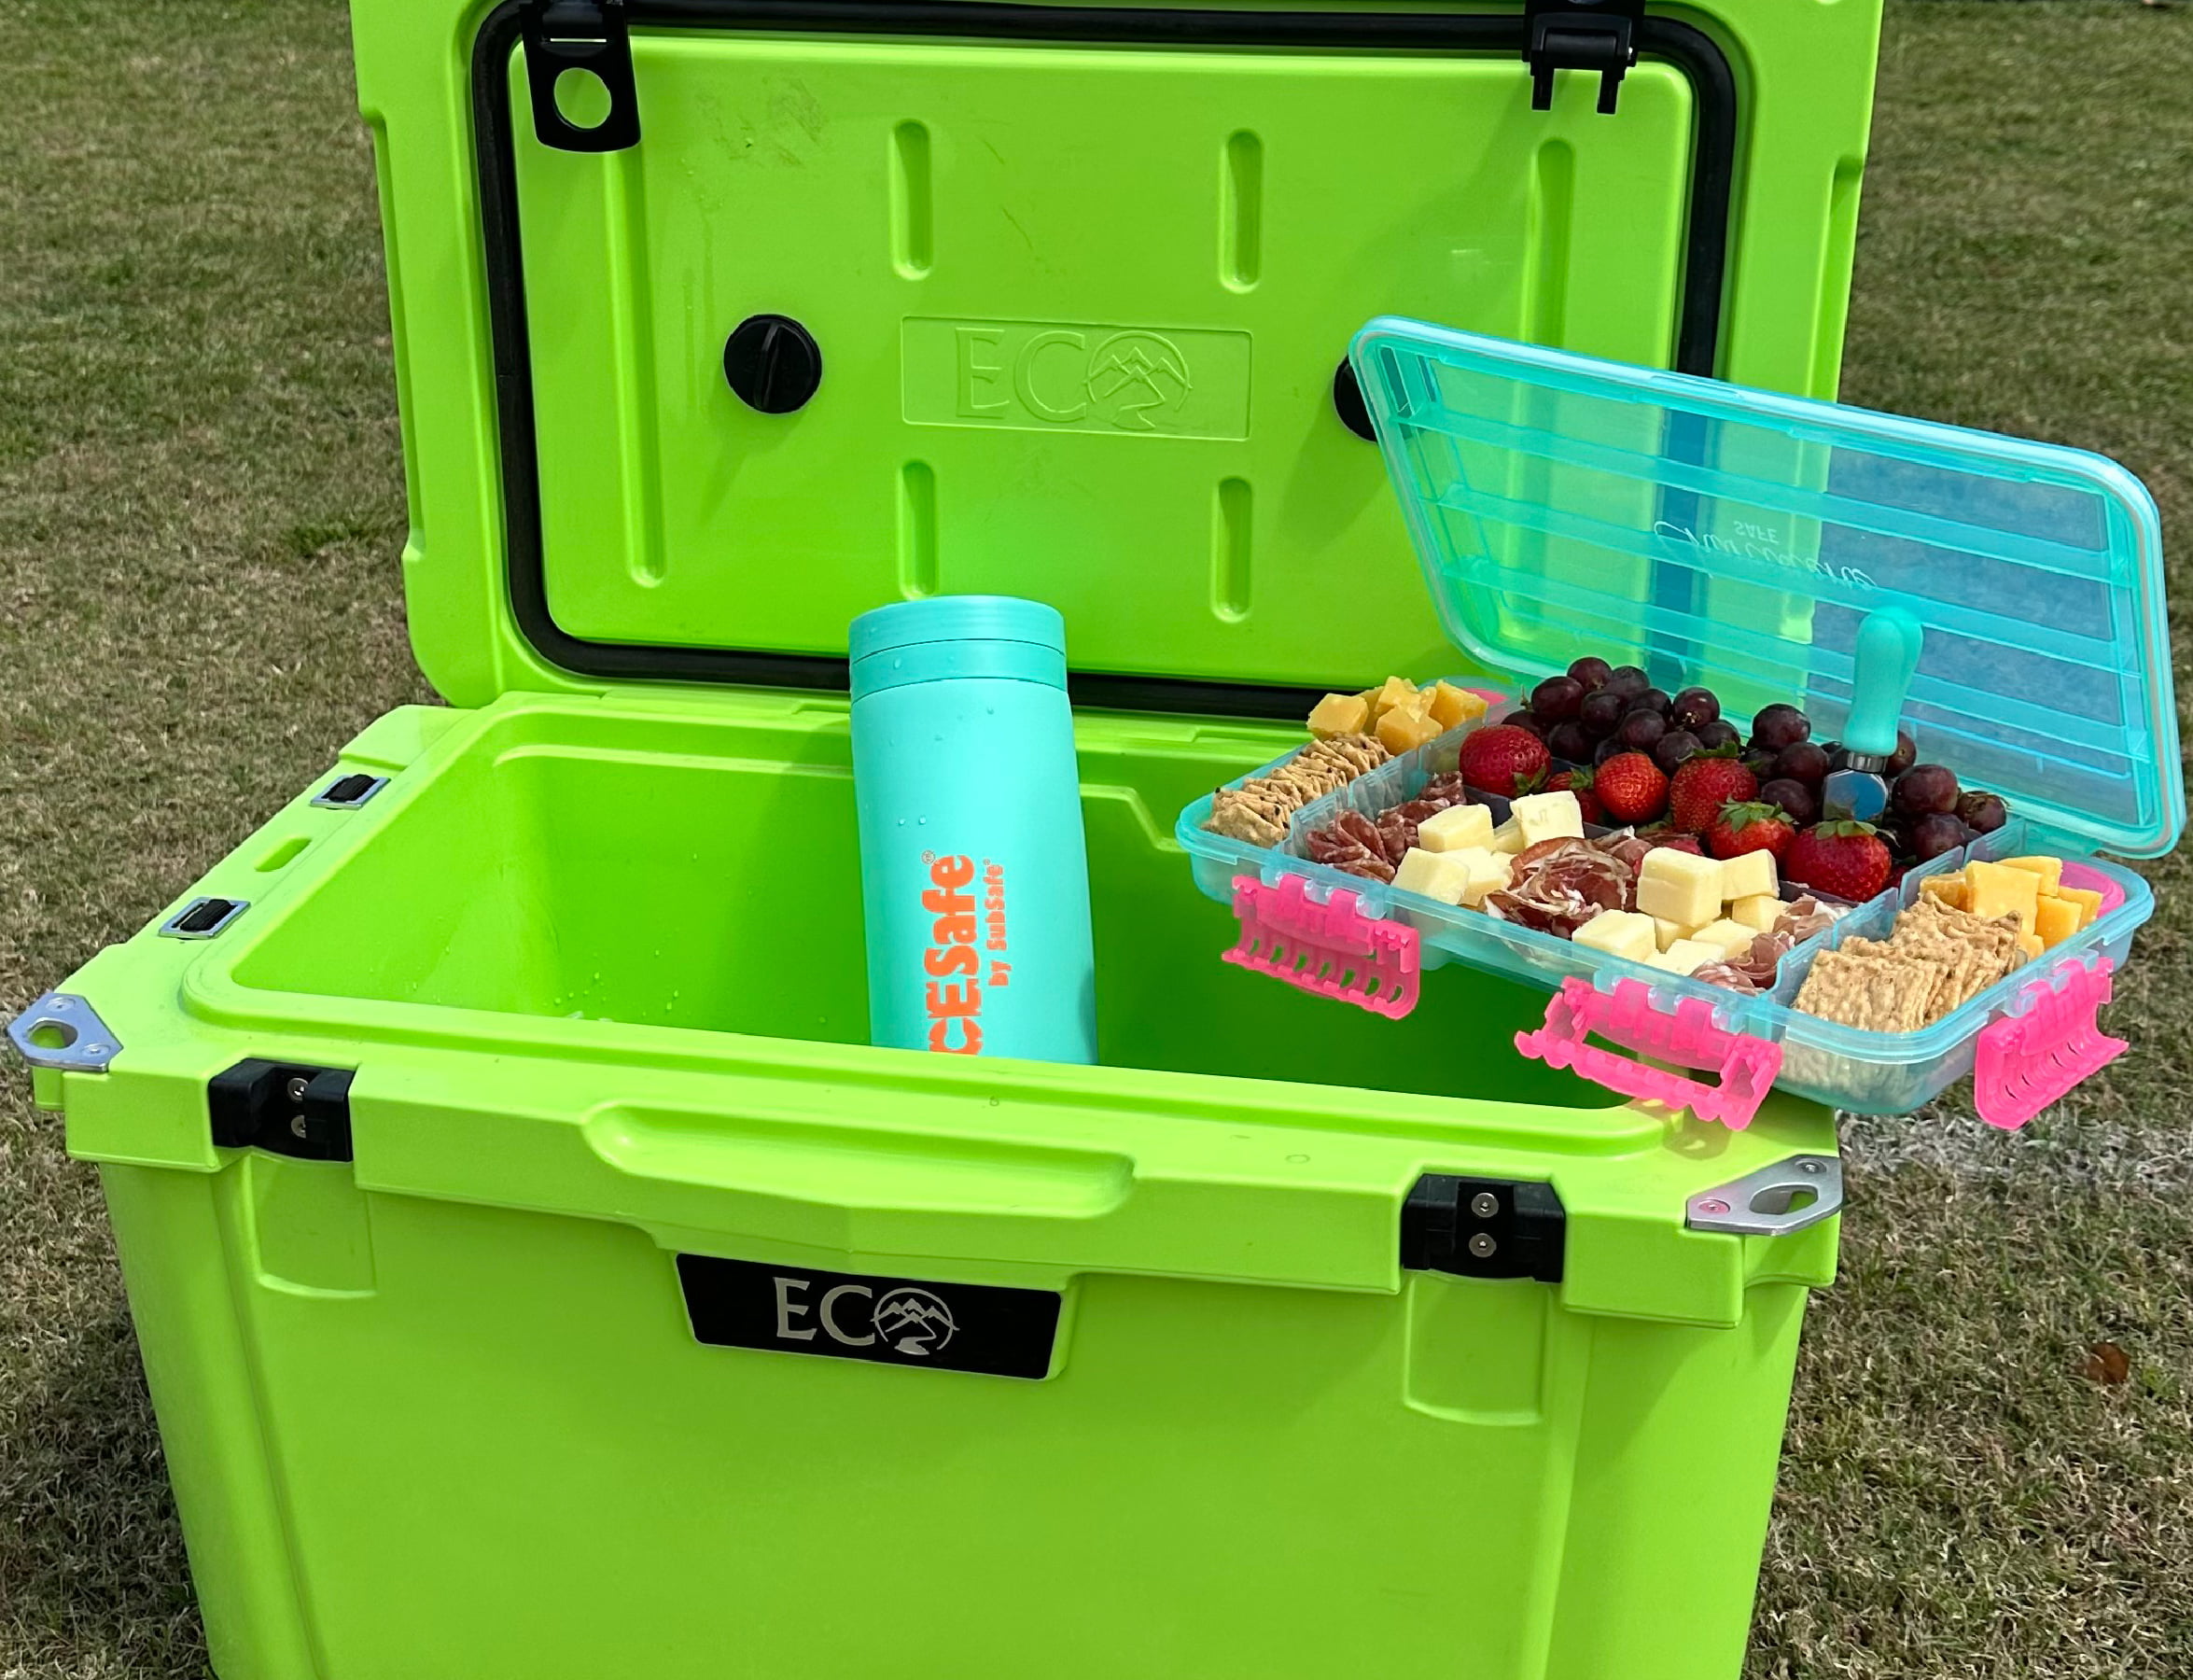 Charcuterie Safe By SubSafe - Waterproof Tackle Box Container Keeps Snacks  Fresh & Dry On the Go - Fill With Cured Meats, Cheese, Nuts - Perfect for  the Boat, Beach, Parties, Picnics, Tailgating & Mor 